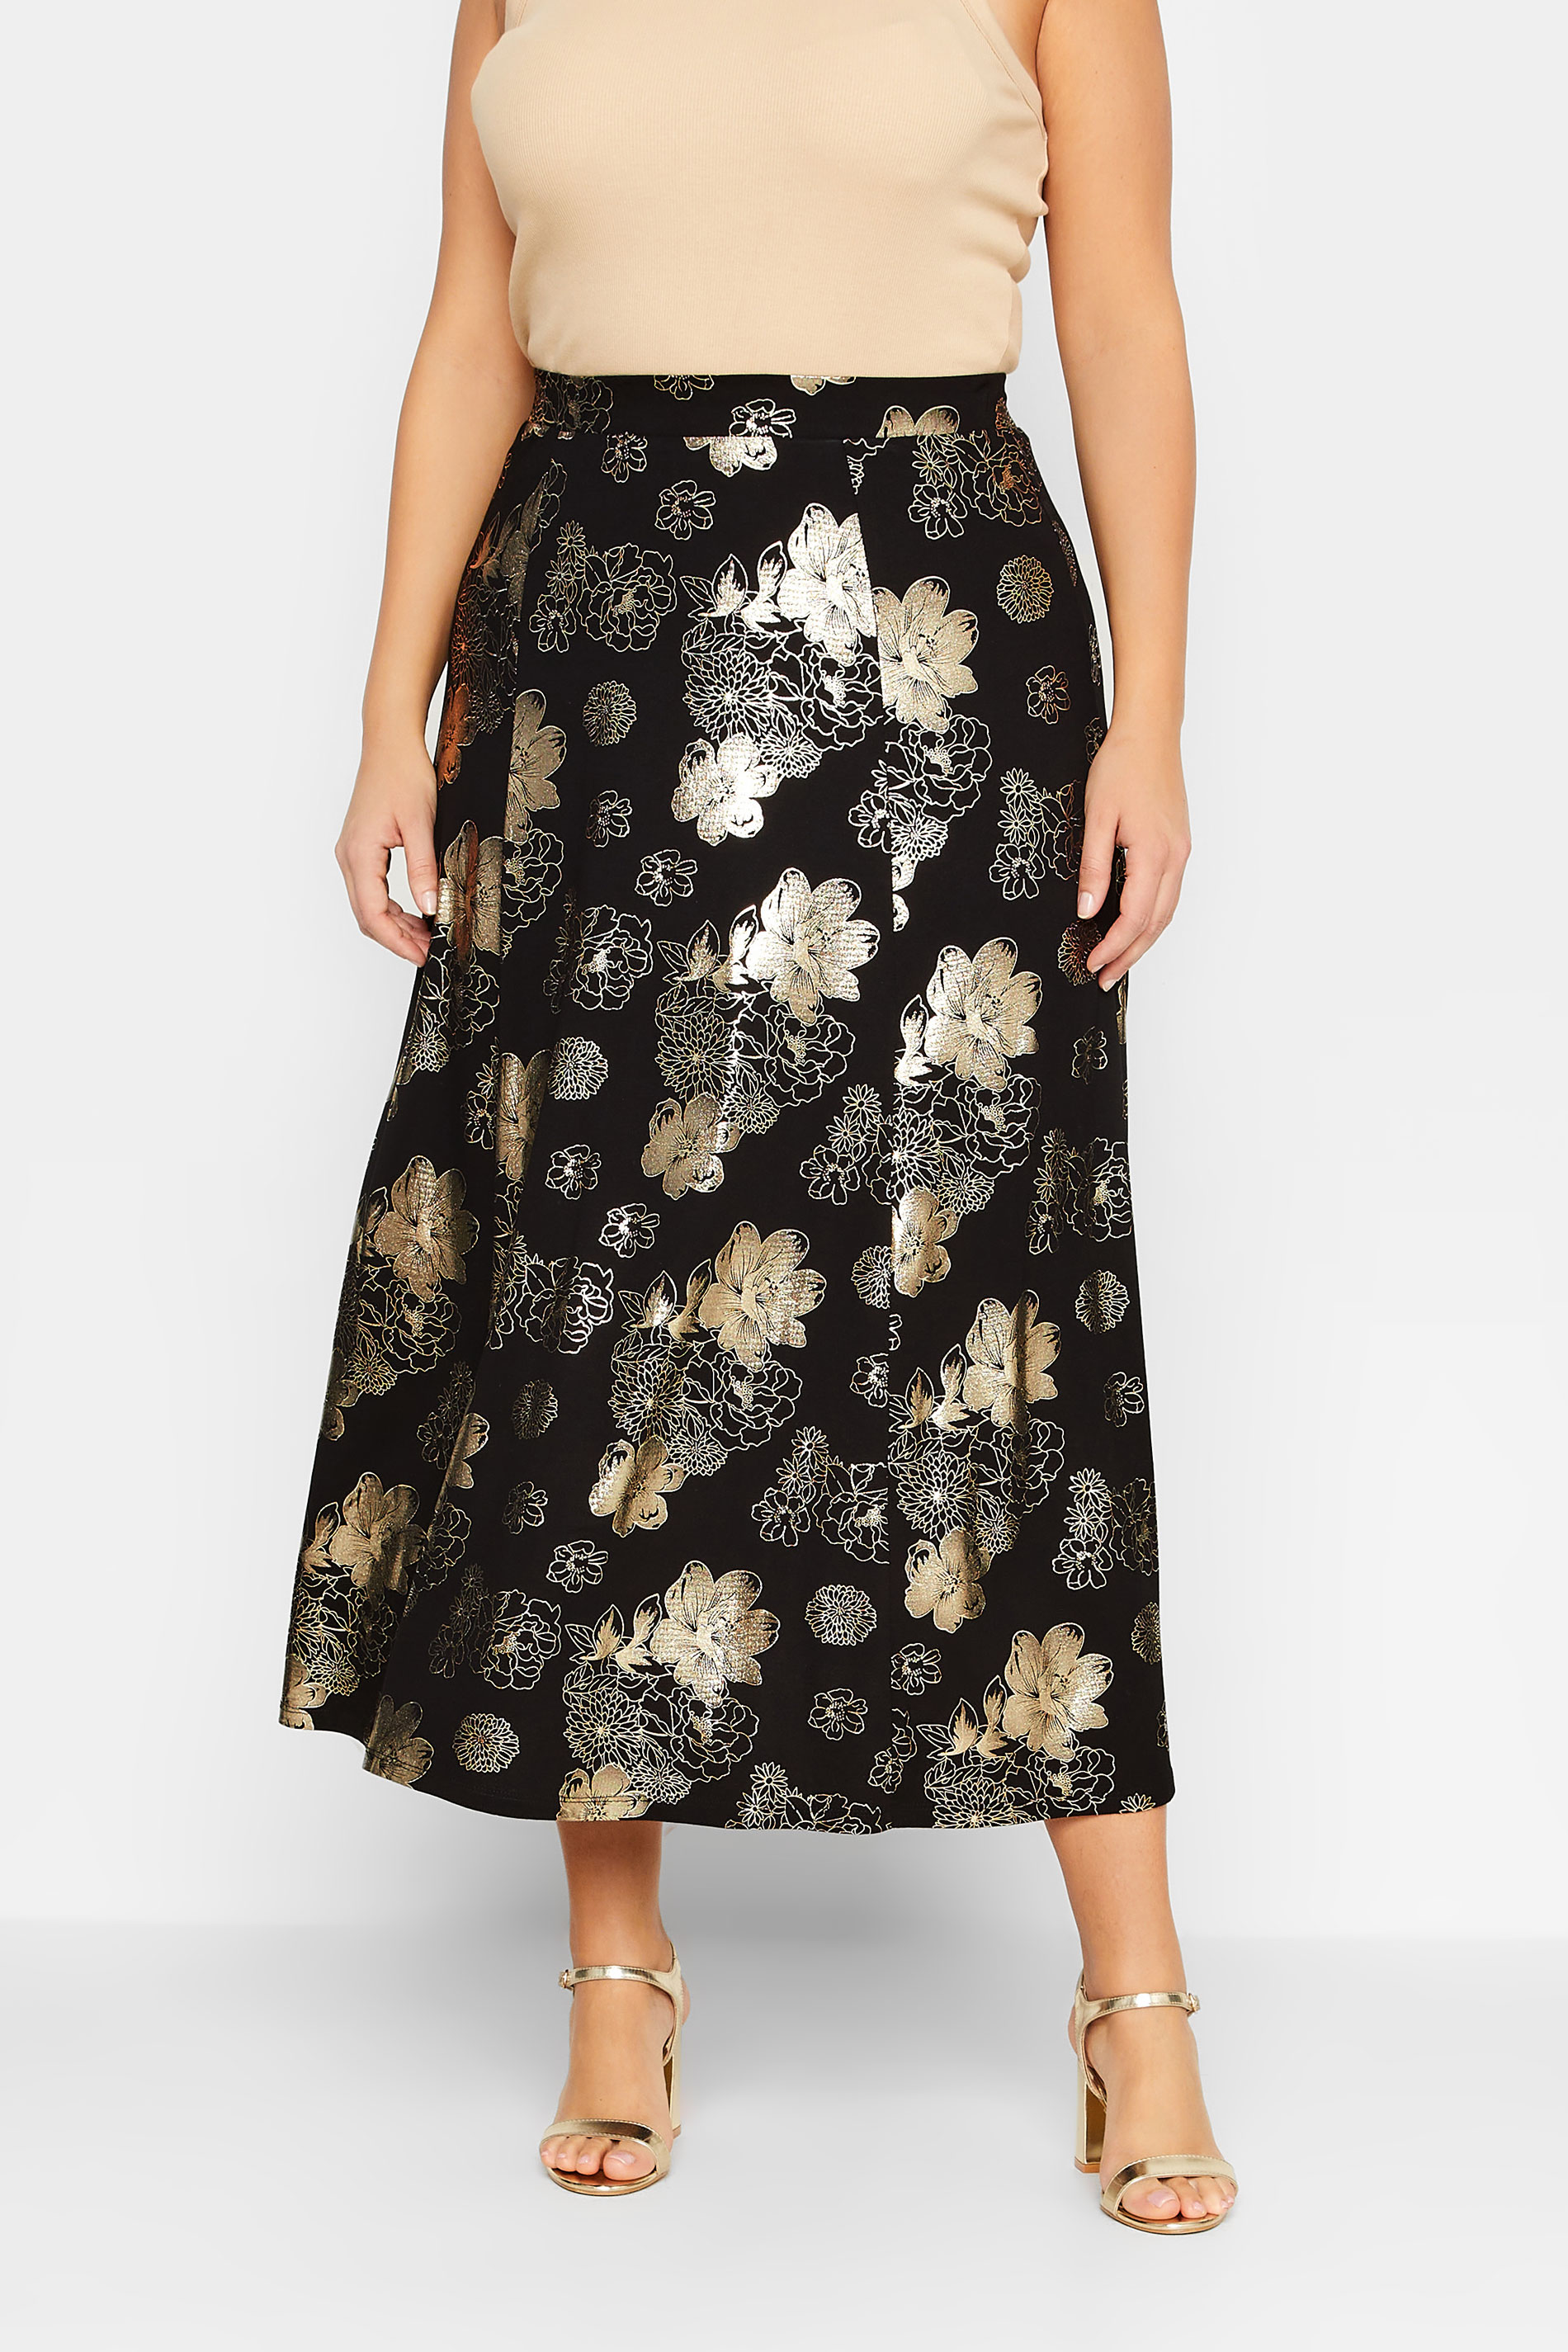 YOURS LUXURY Plus Size Black Floral Foil Printed Skirt | Yours Clothing 1